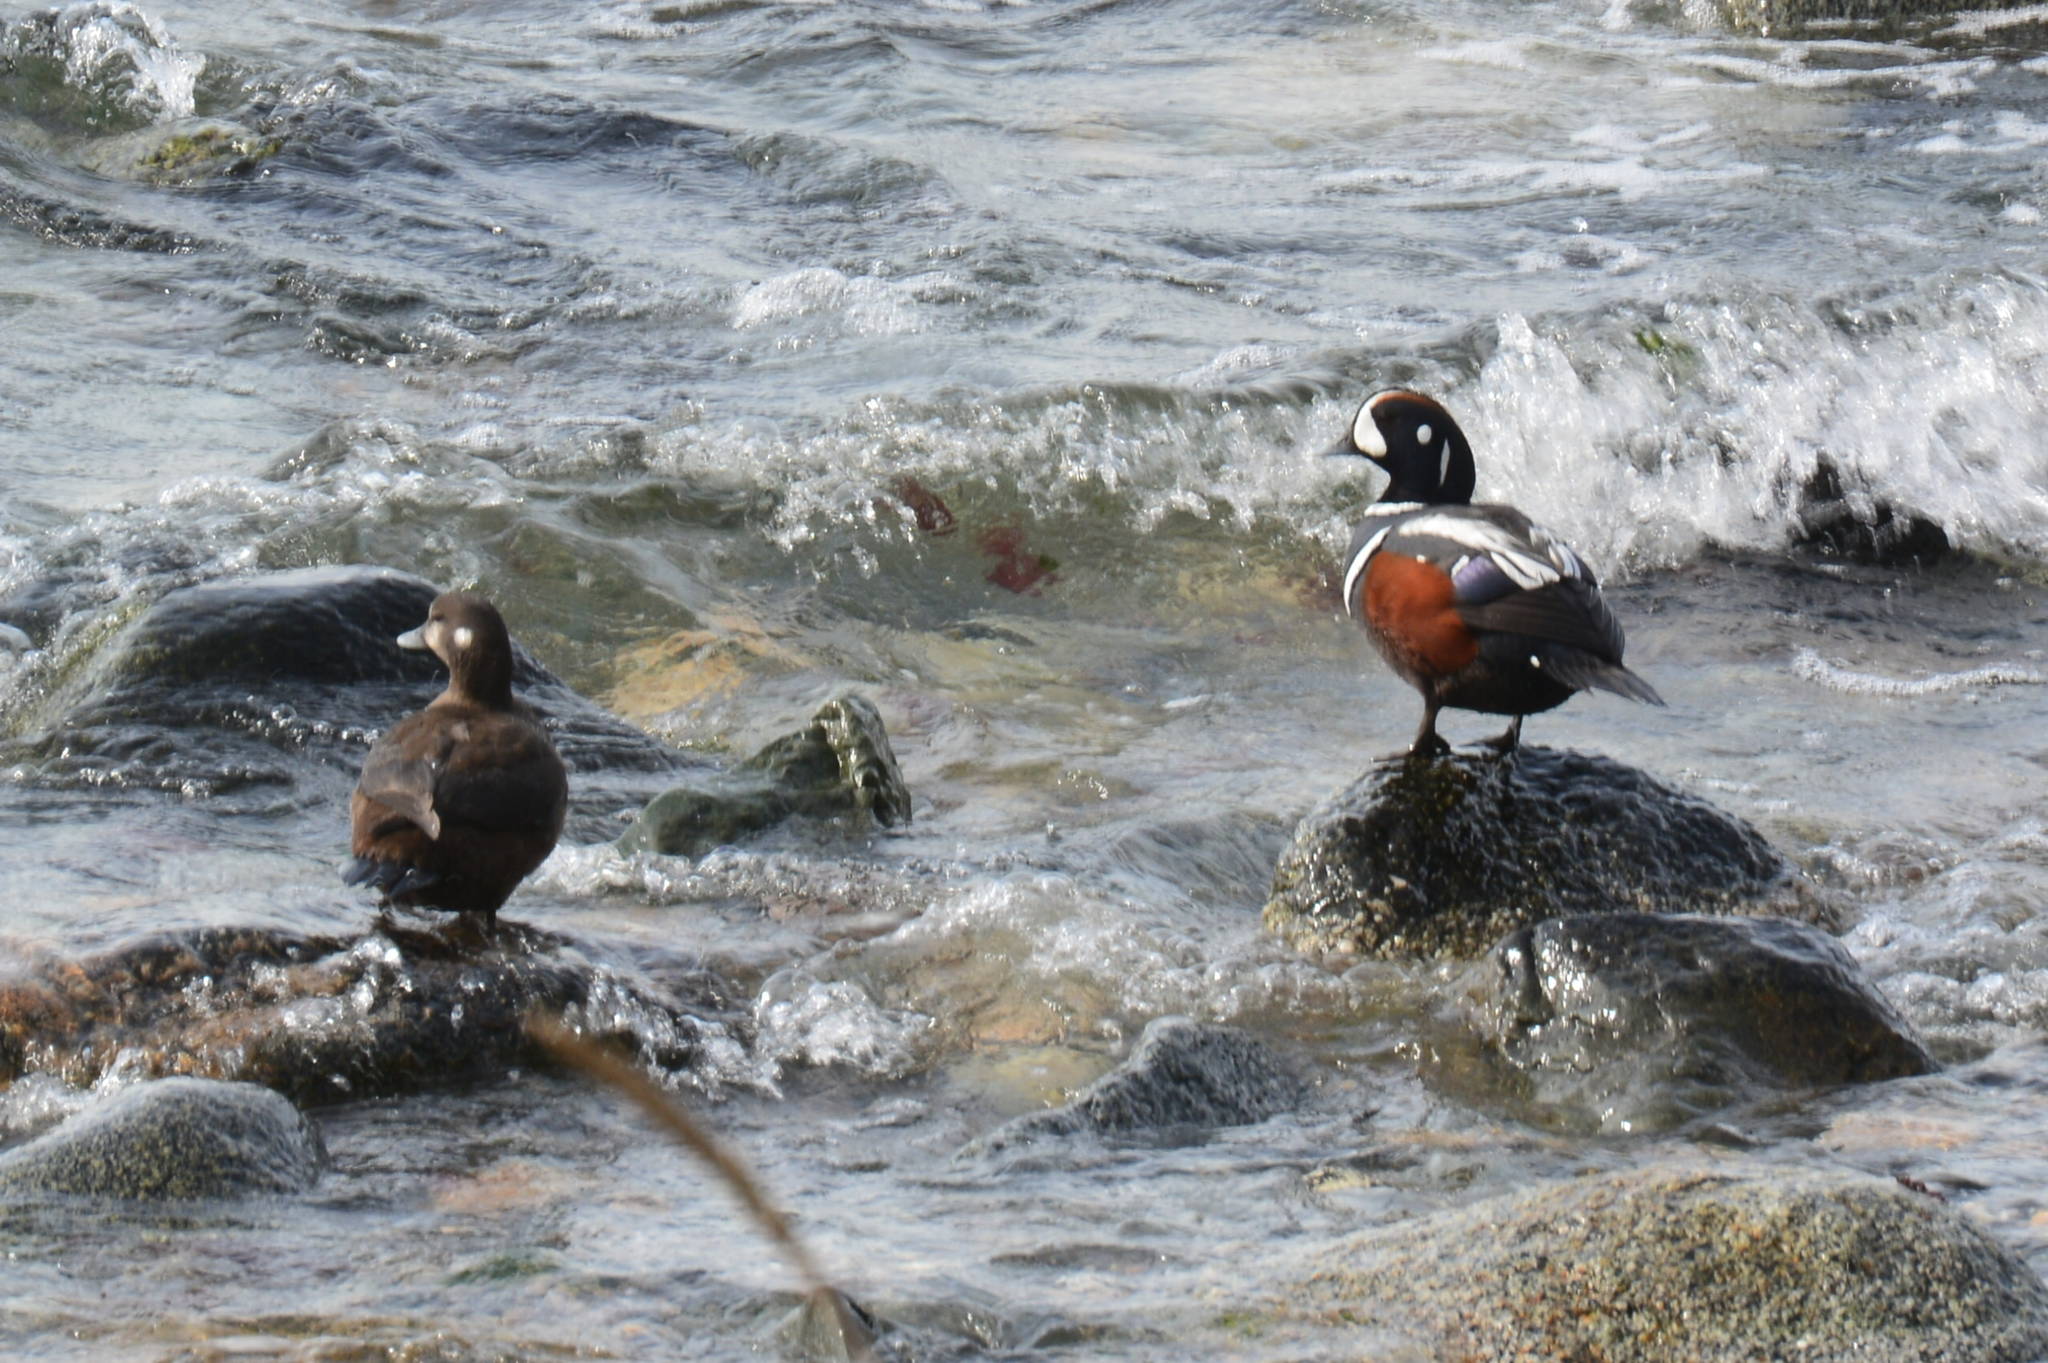 During early May ducks and other seabirds visited the north Shelter Island area to feed on small fish that were present in the area. This photo shows and male and female wood ducks taking a break from fishing in the near shore area. (Courtesy Photo | Jerry Reinwand)